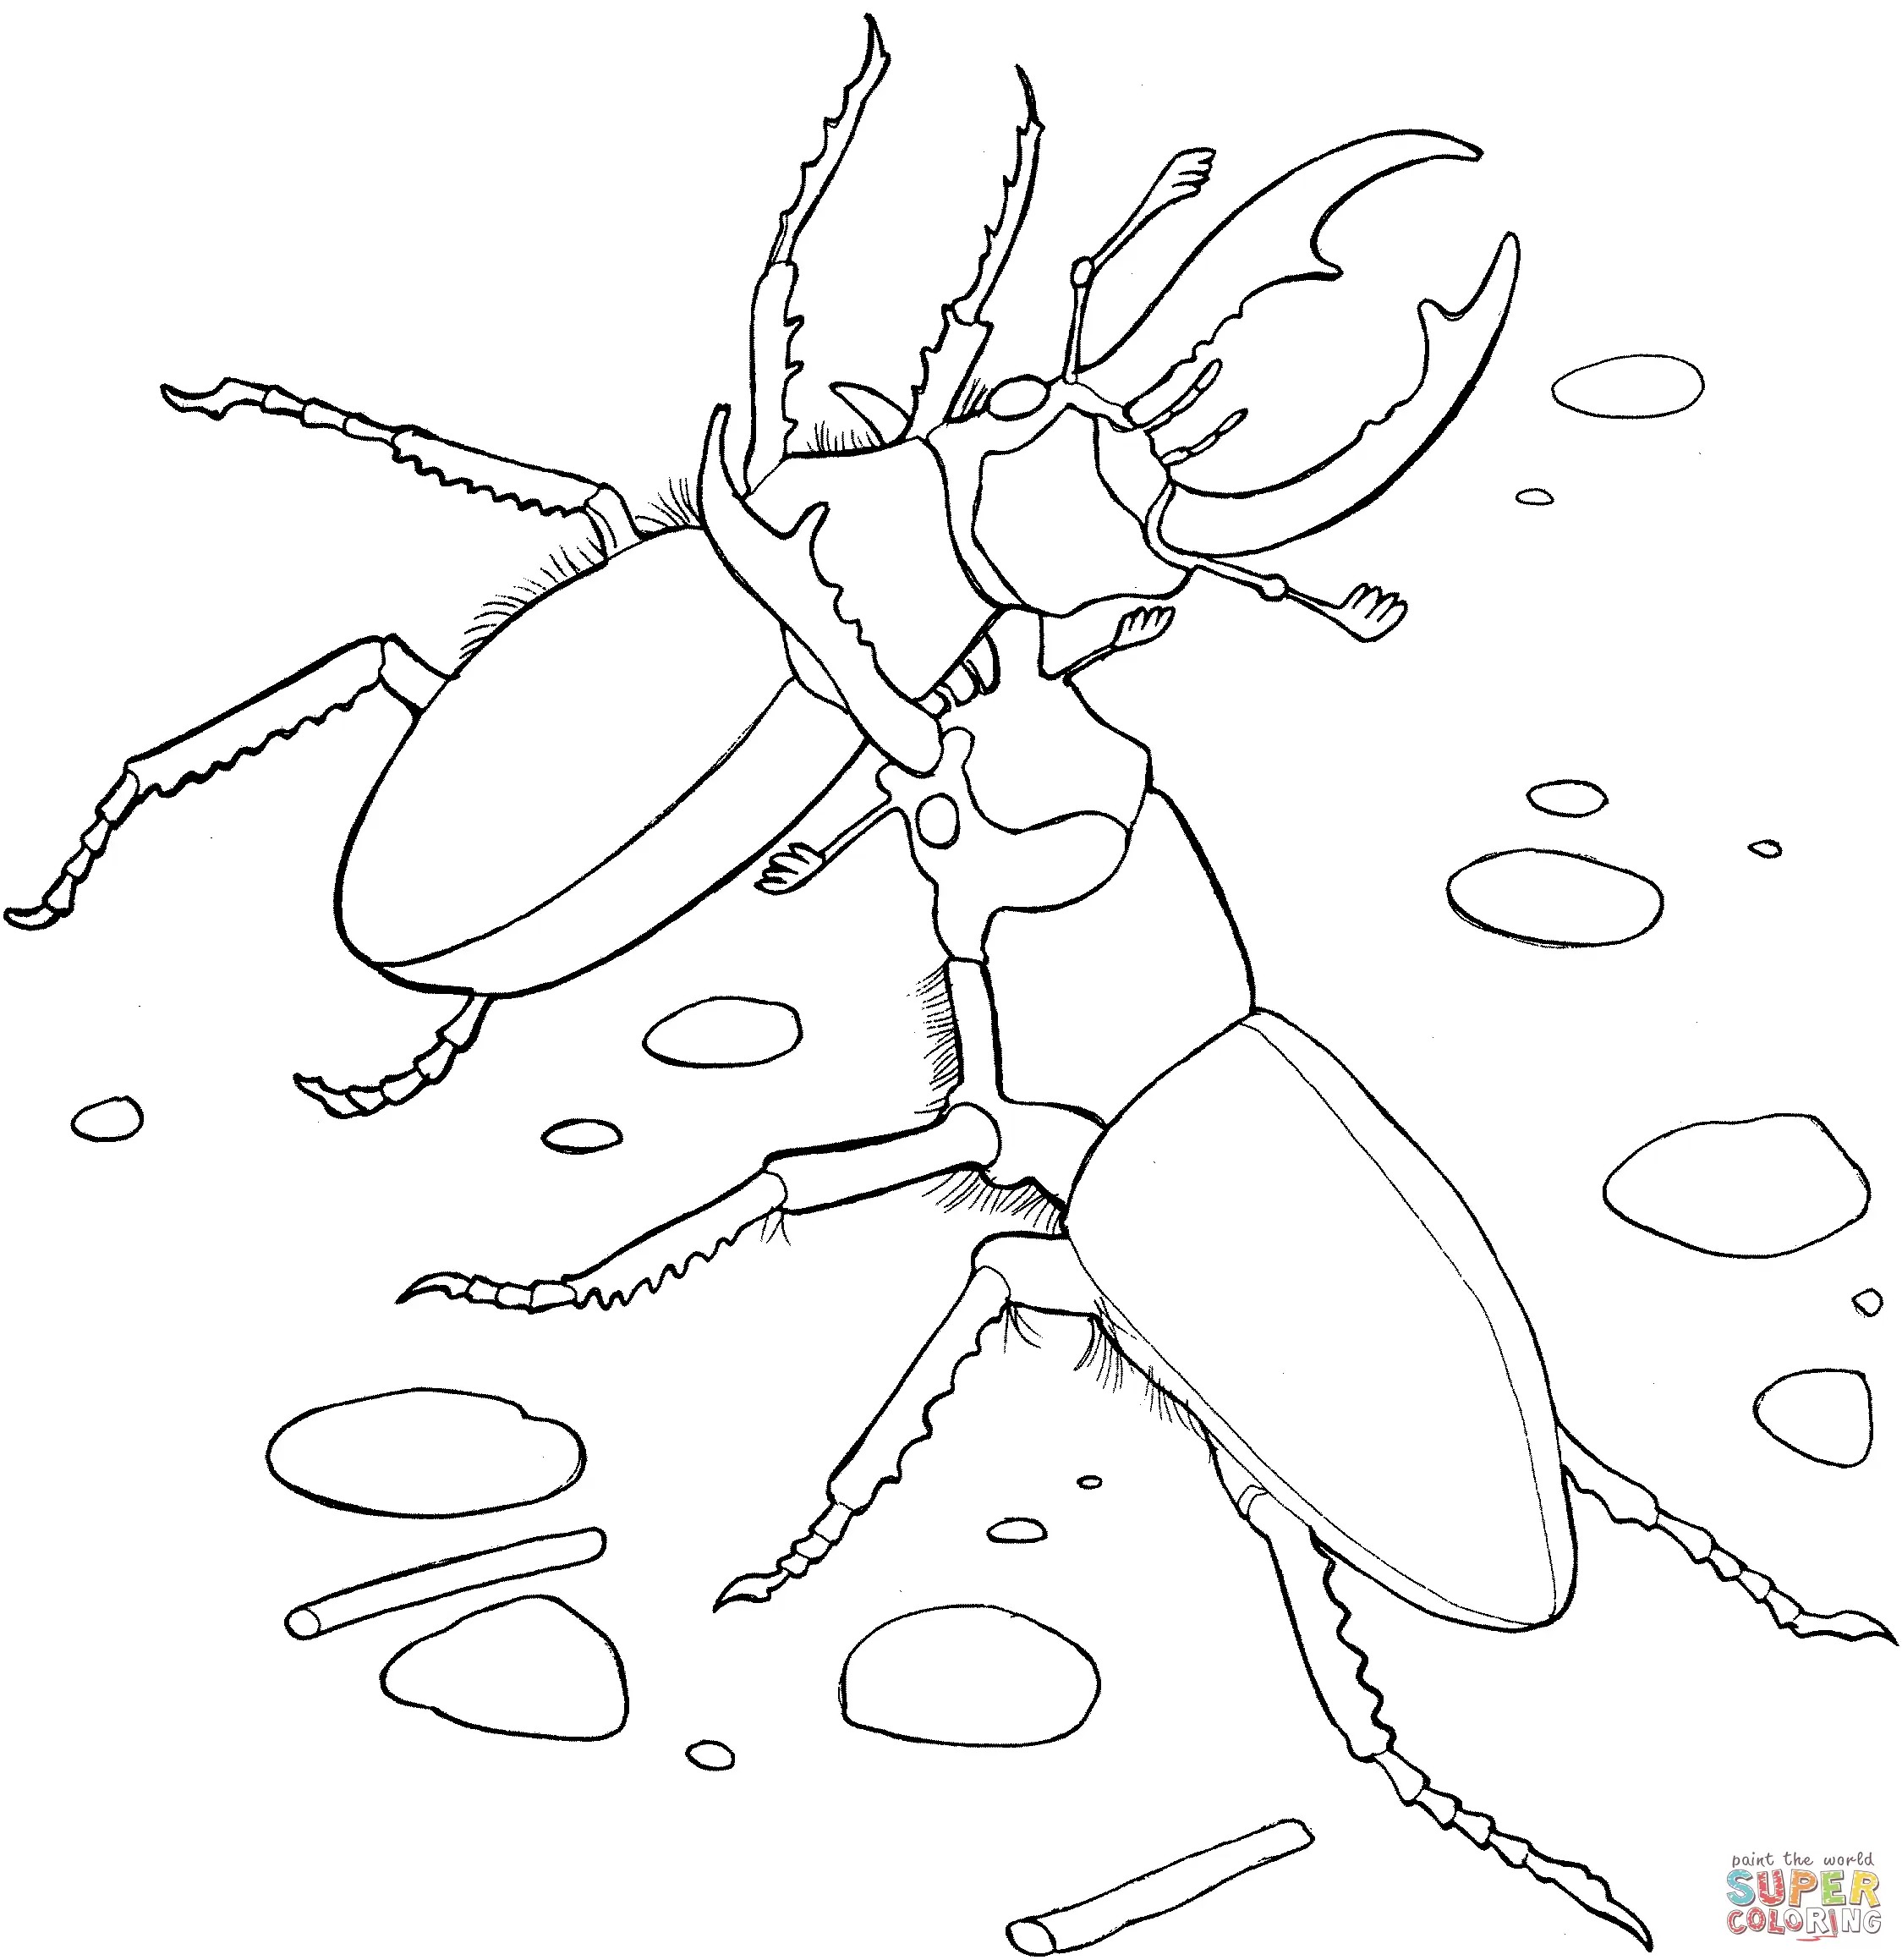 Ipad Coloring Pages at GetColorings.com | Free printable colorings